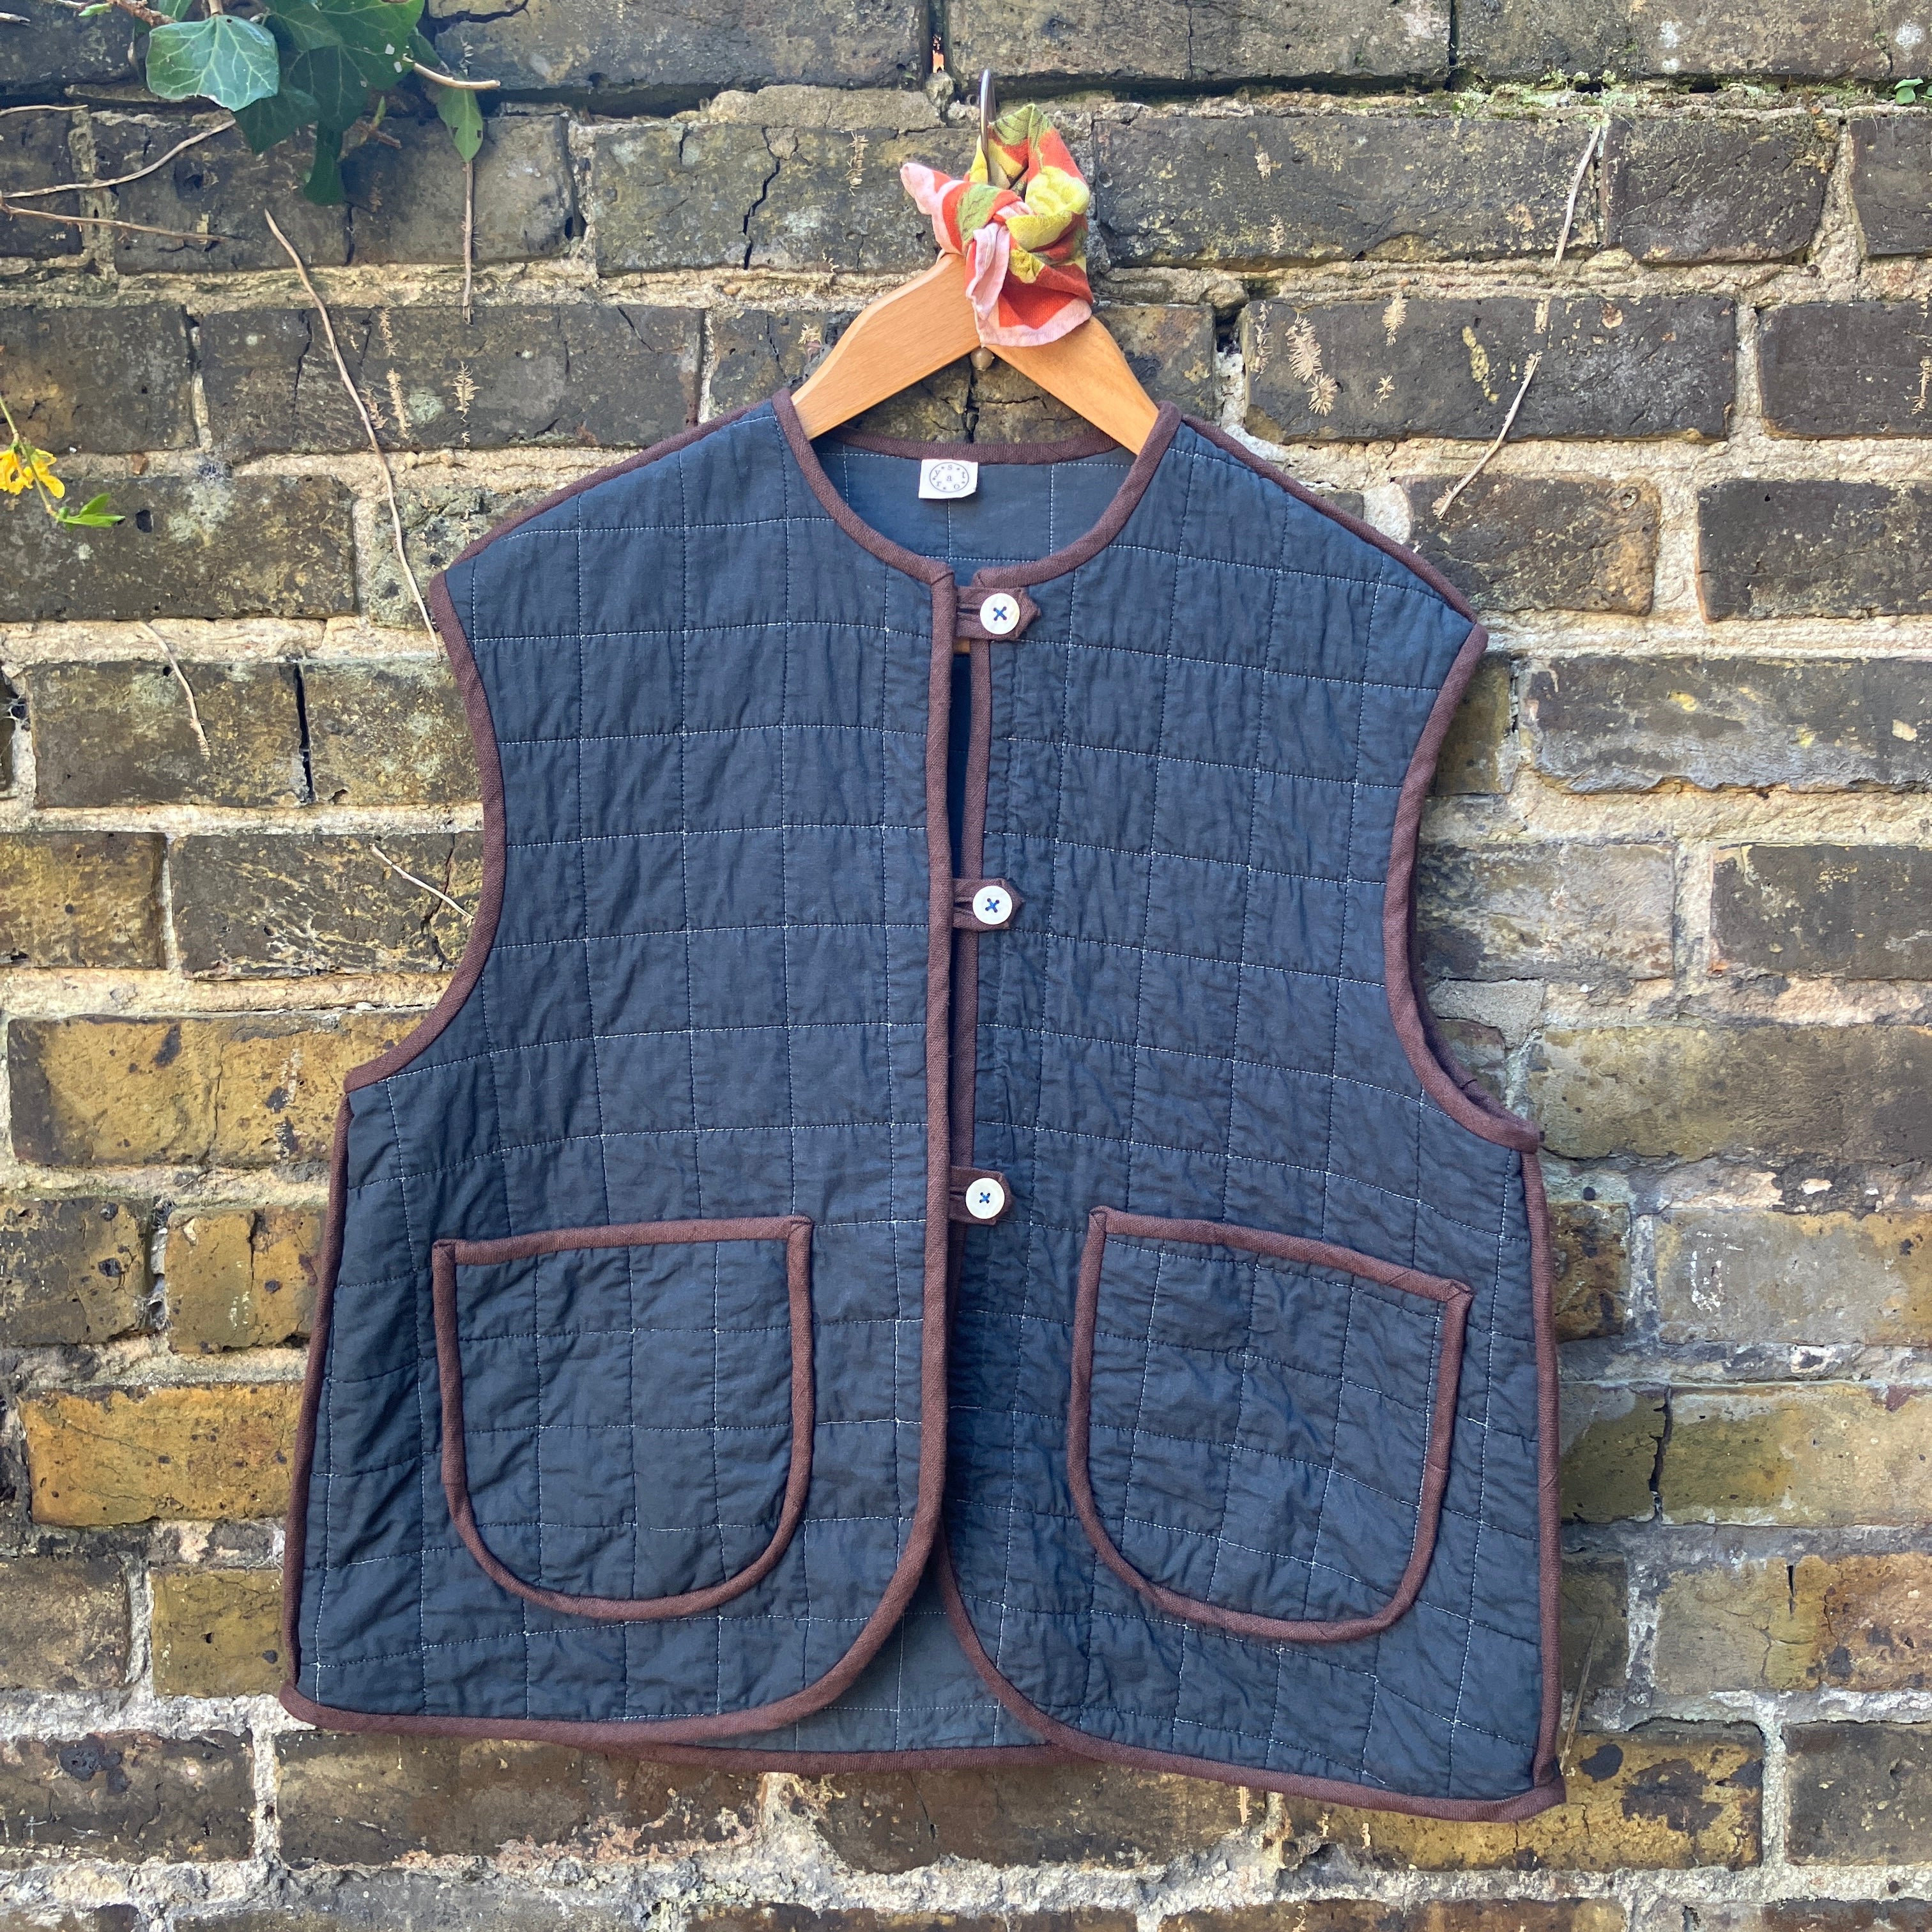 Handmade reclaimed quilted vest